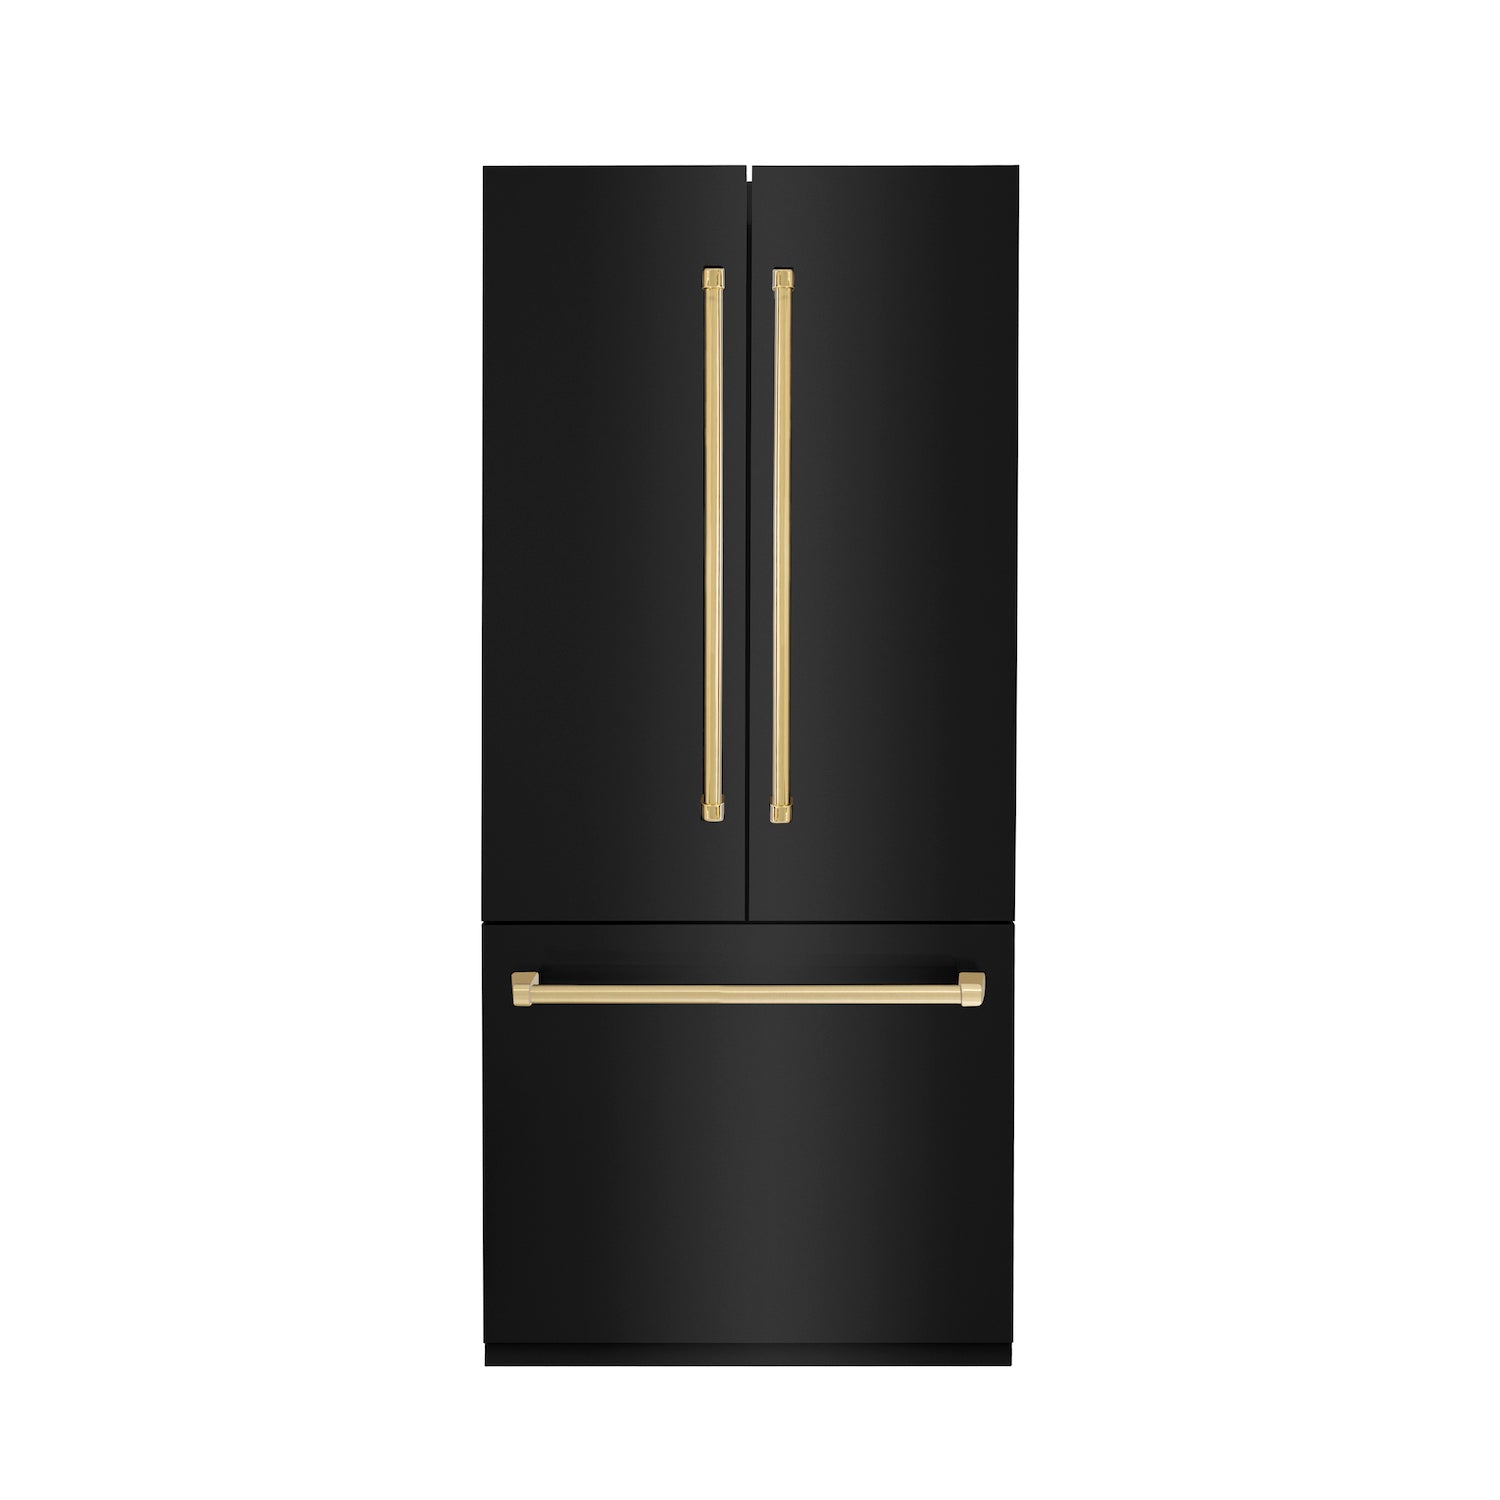 ZLINE Autograph Edition 36 in. 19.6 cu. ft. Built-in 2-Door Bottom Freezer Refrigerator with Internal Water and Ice Dispenser in Black Stainless Steel with Polished Gold Accents (RBIVZ-BS-36-G) front, closed.